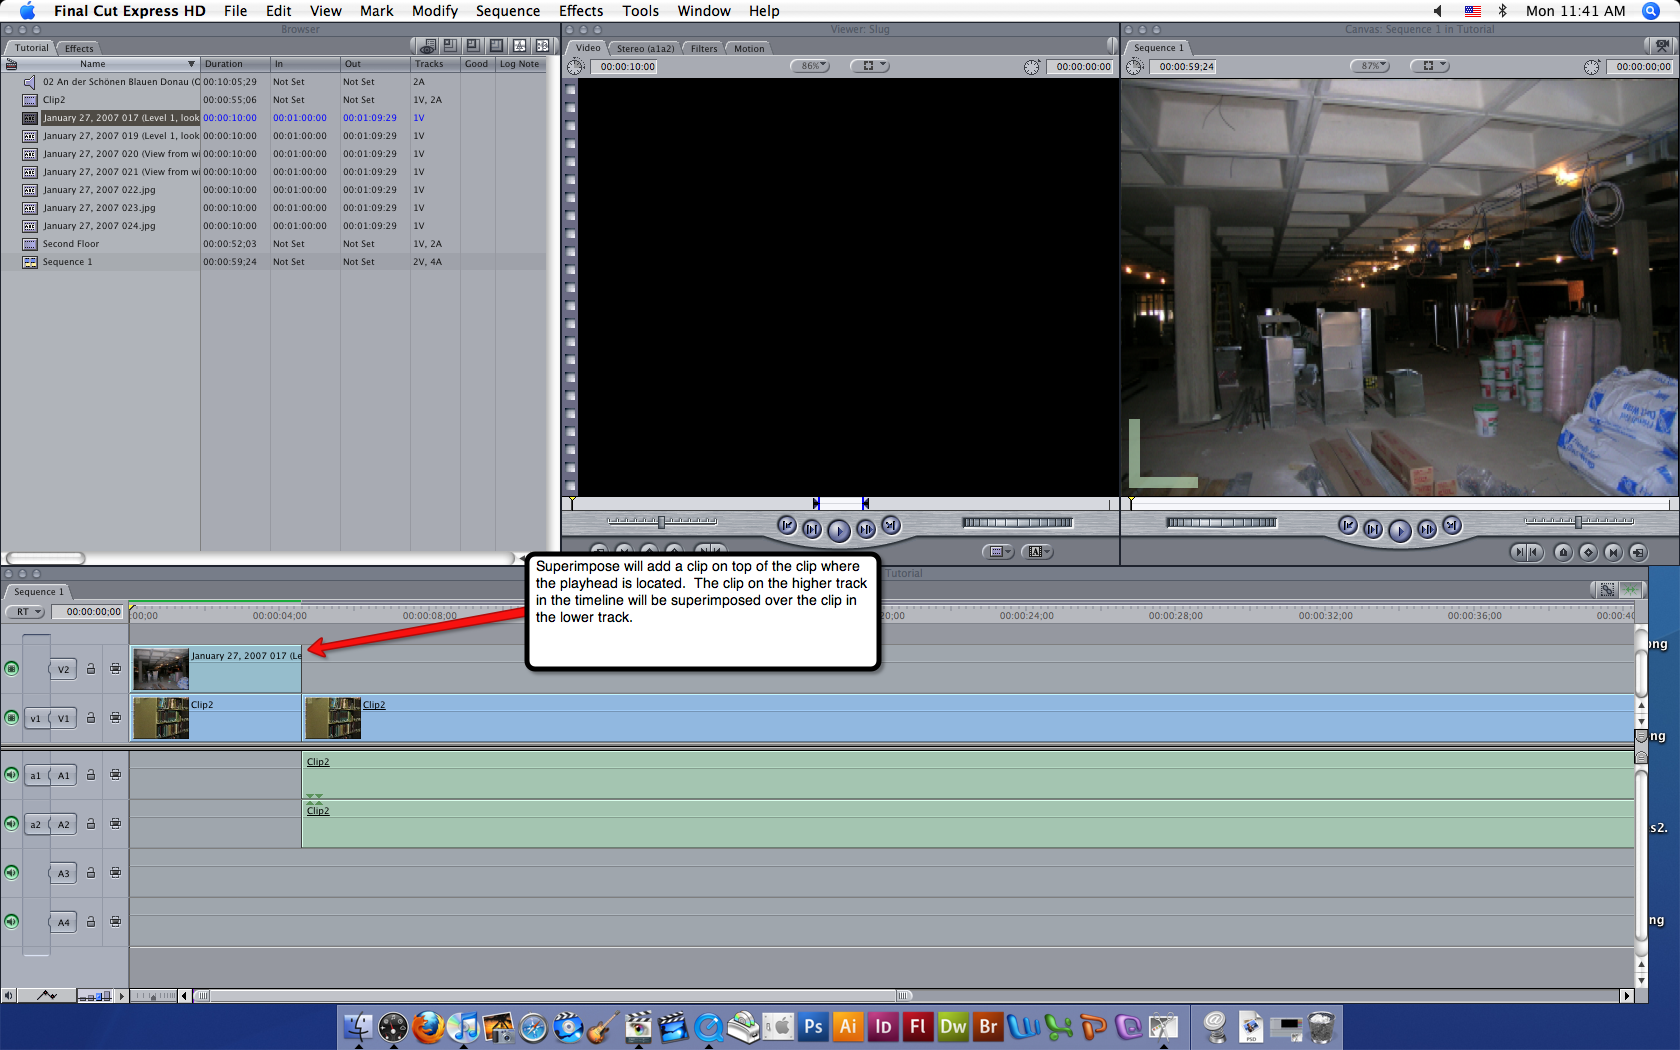 Visual guide to adding video to Final Cut Express HD via the sumperimpose video function.